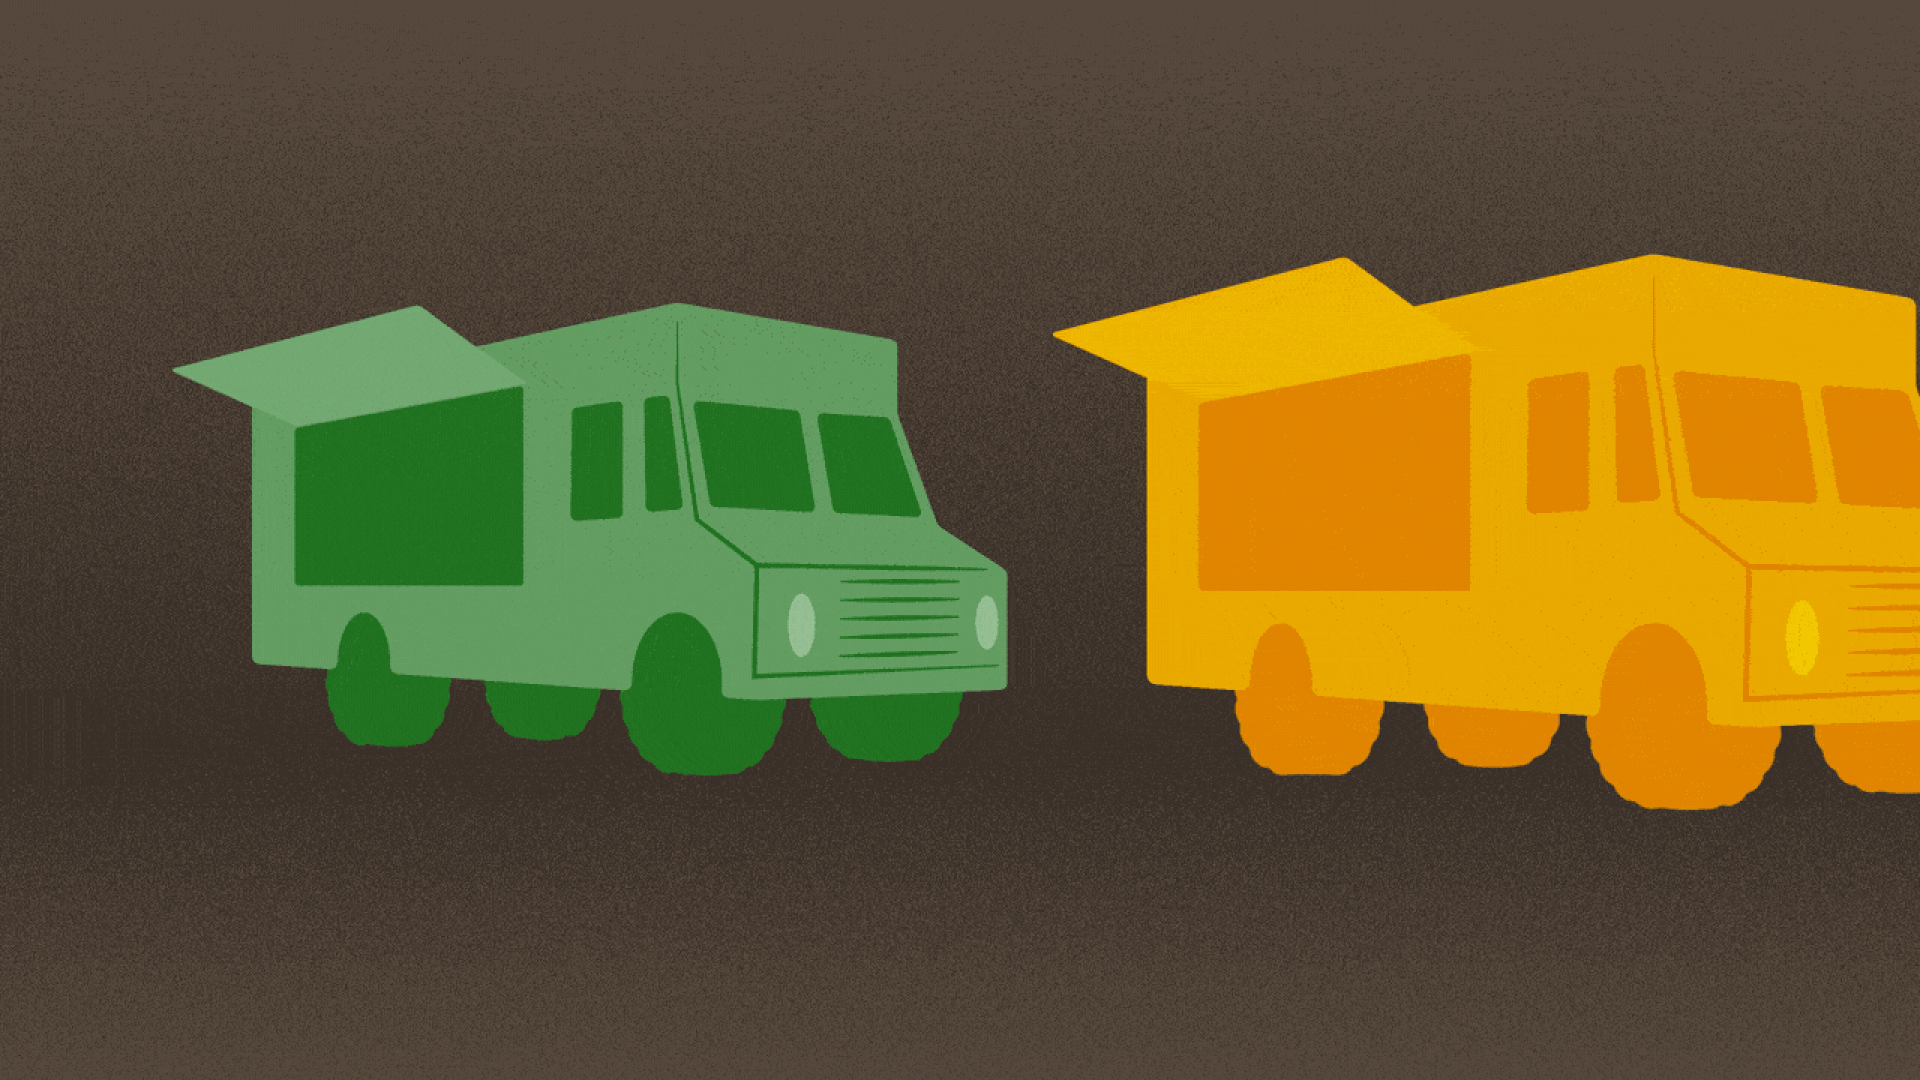 Animated illustration of a line of food trucks driving from left to right.